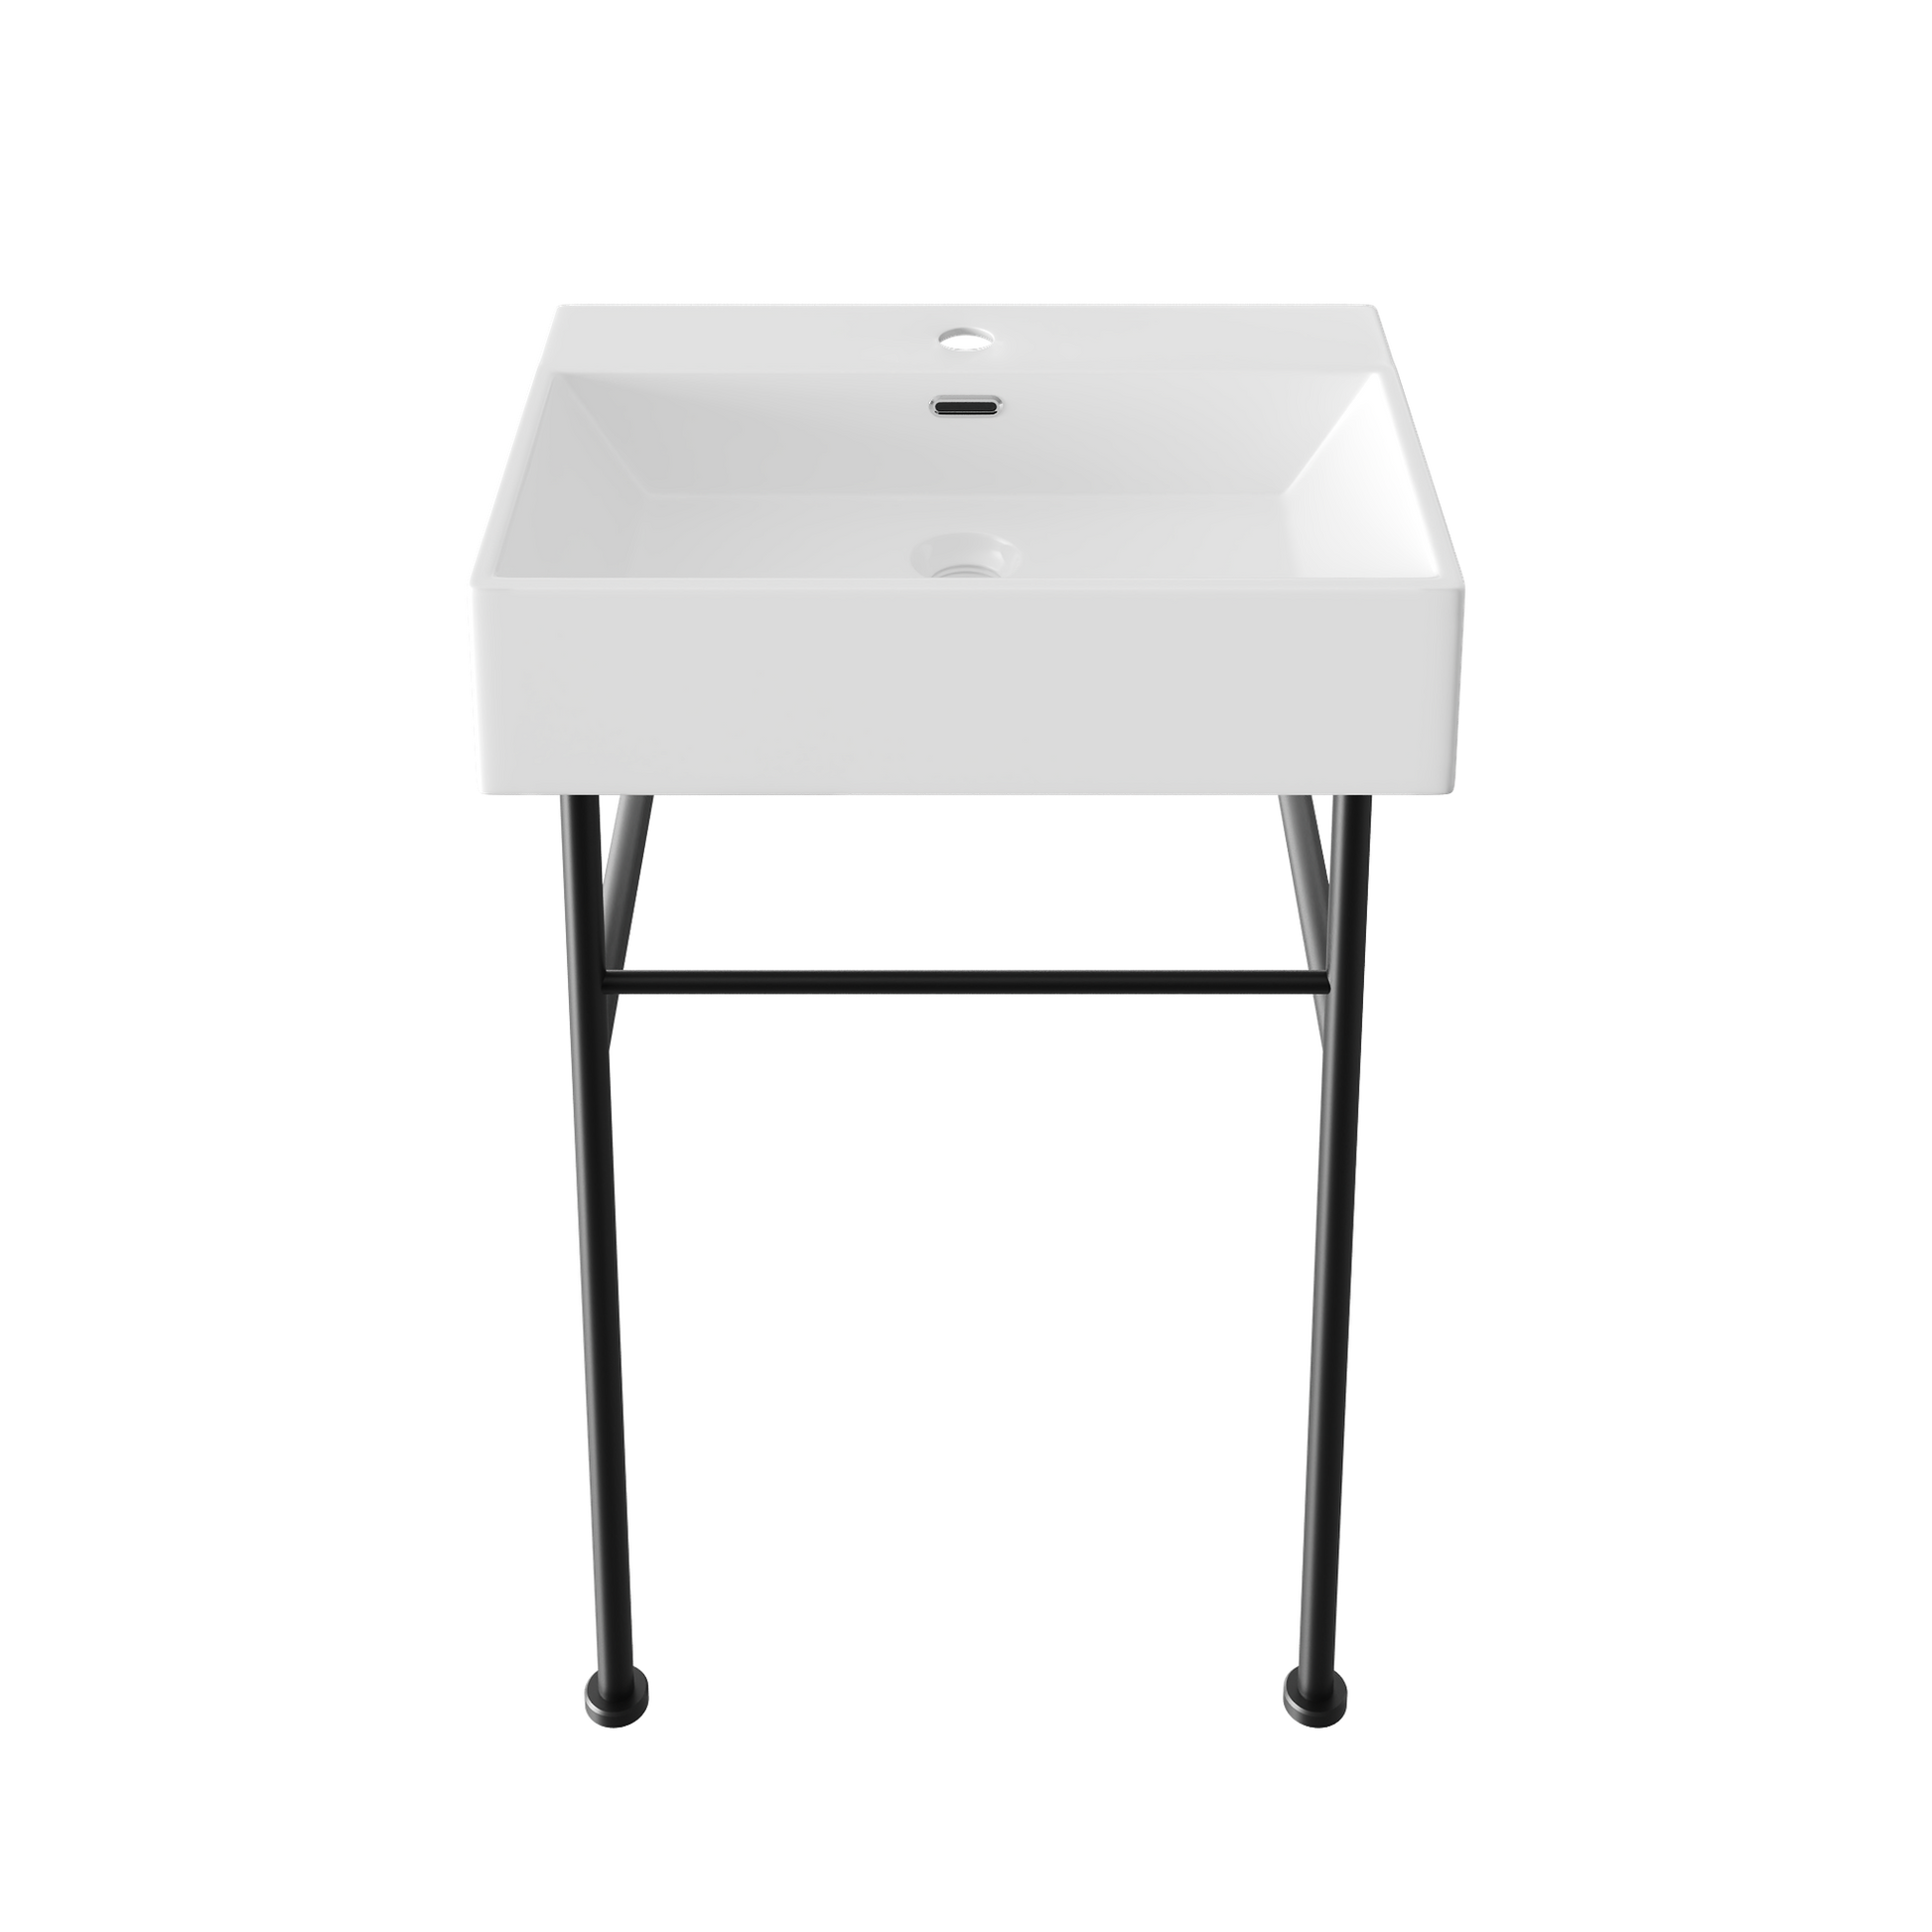 DeerValley 24" Rectangular White Ceramic Console Bathroom Sink With Black Legs and Single Faucet Hole